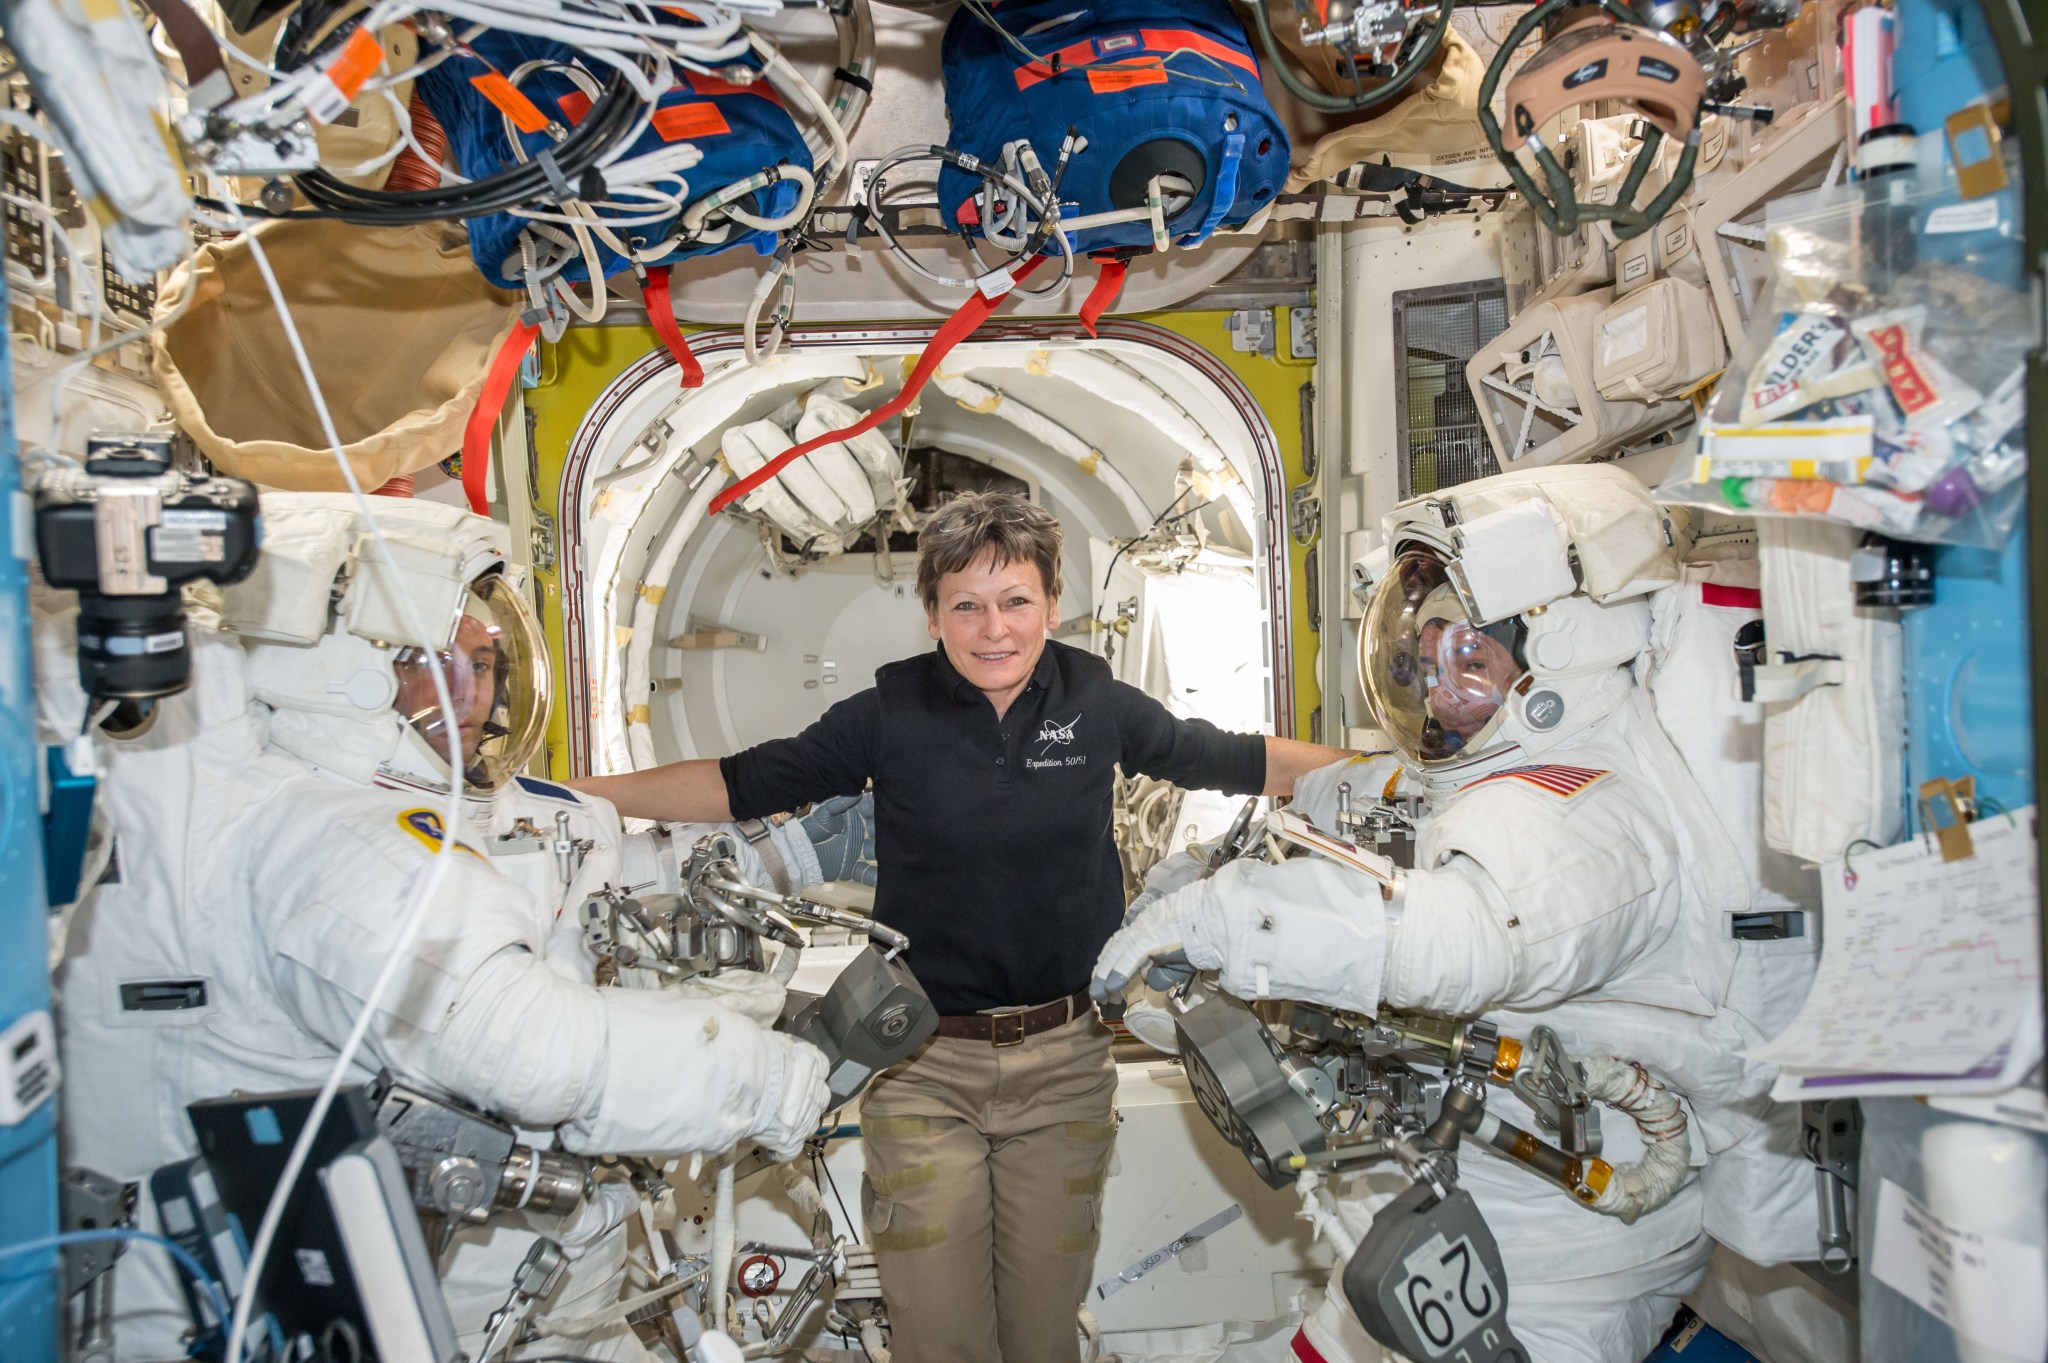 NASA astronaut Peggy Whitson is set to extend her mission with an additional three months at the International Space Station.